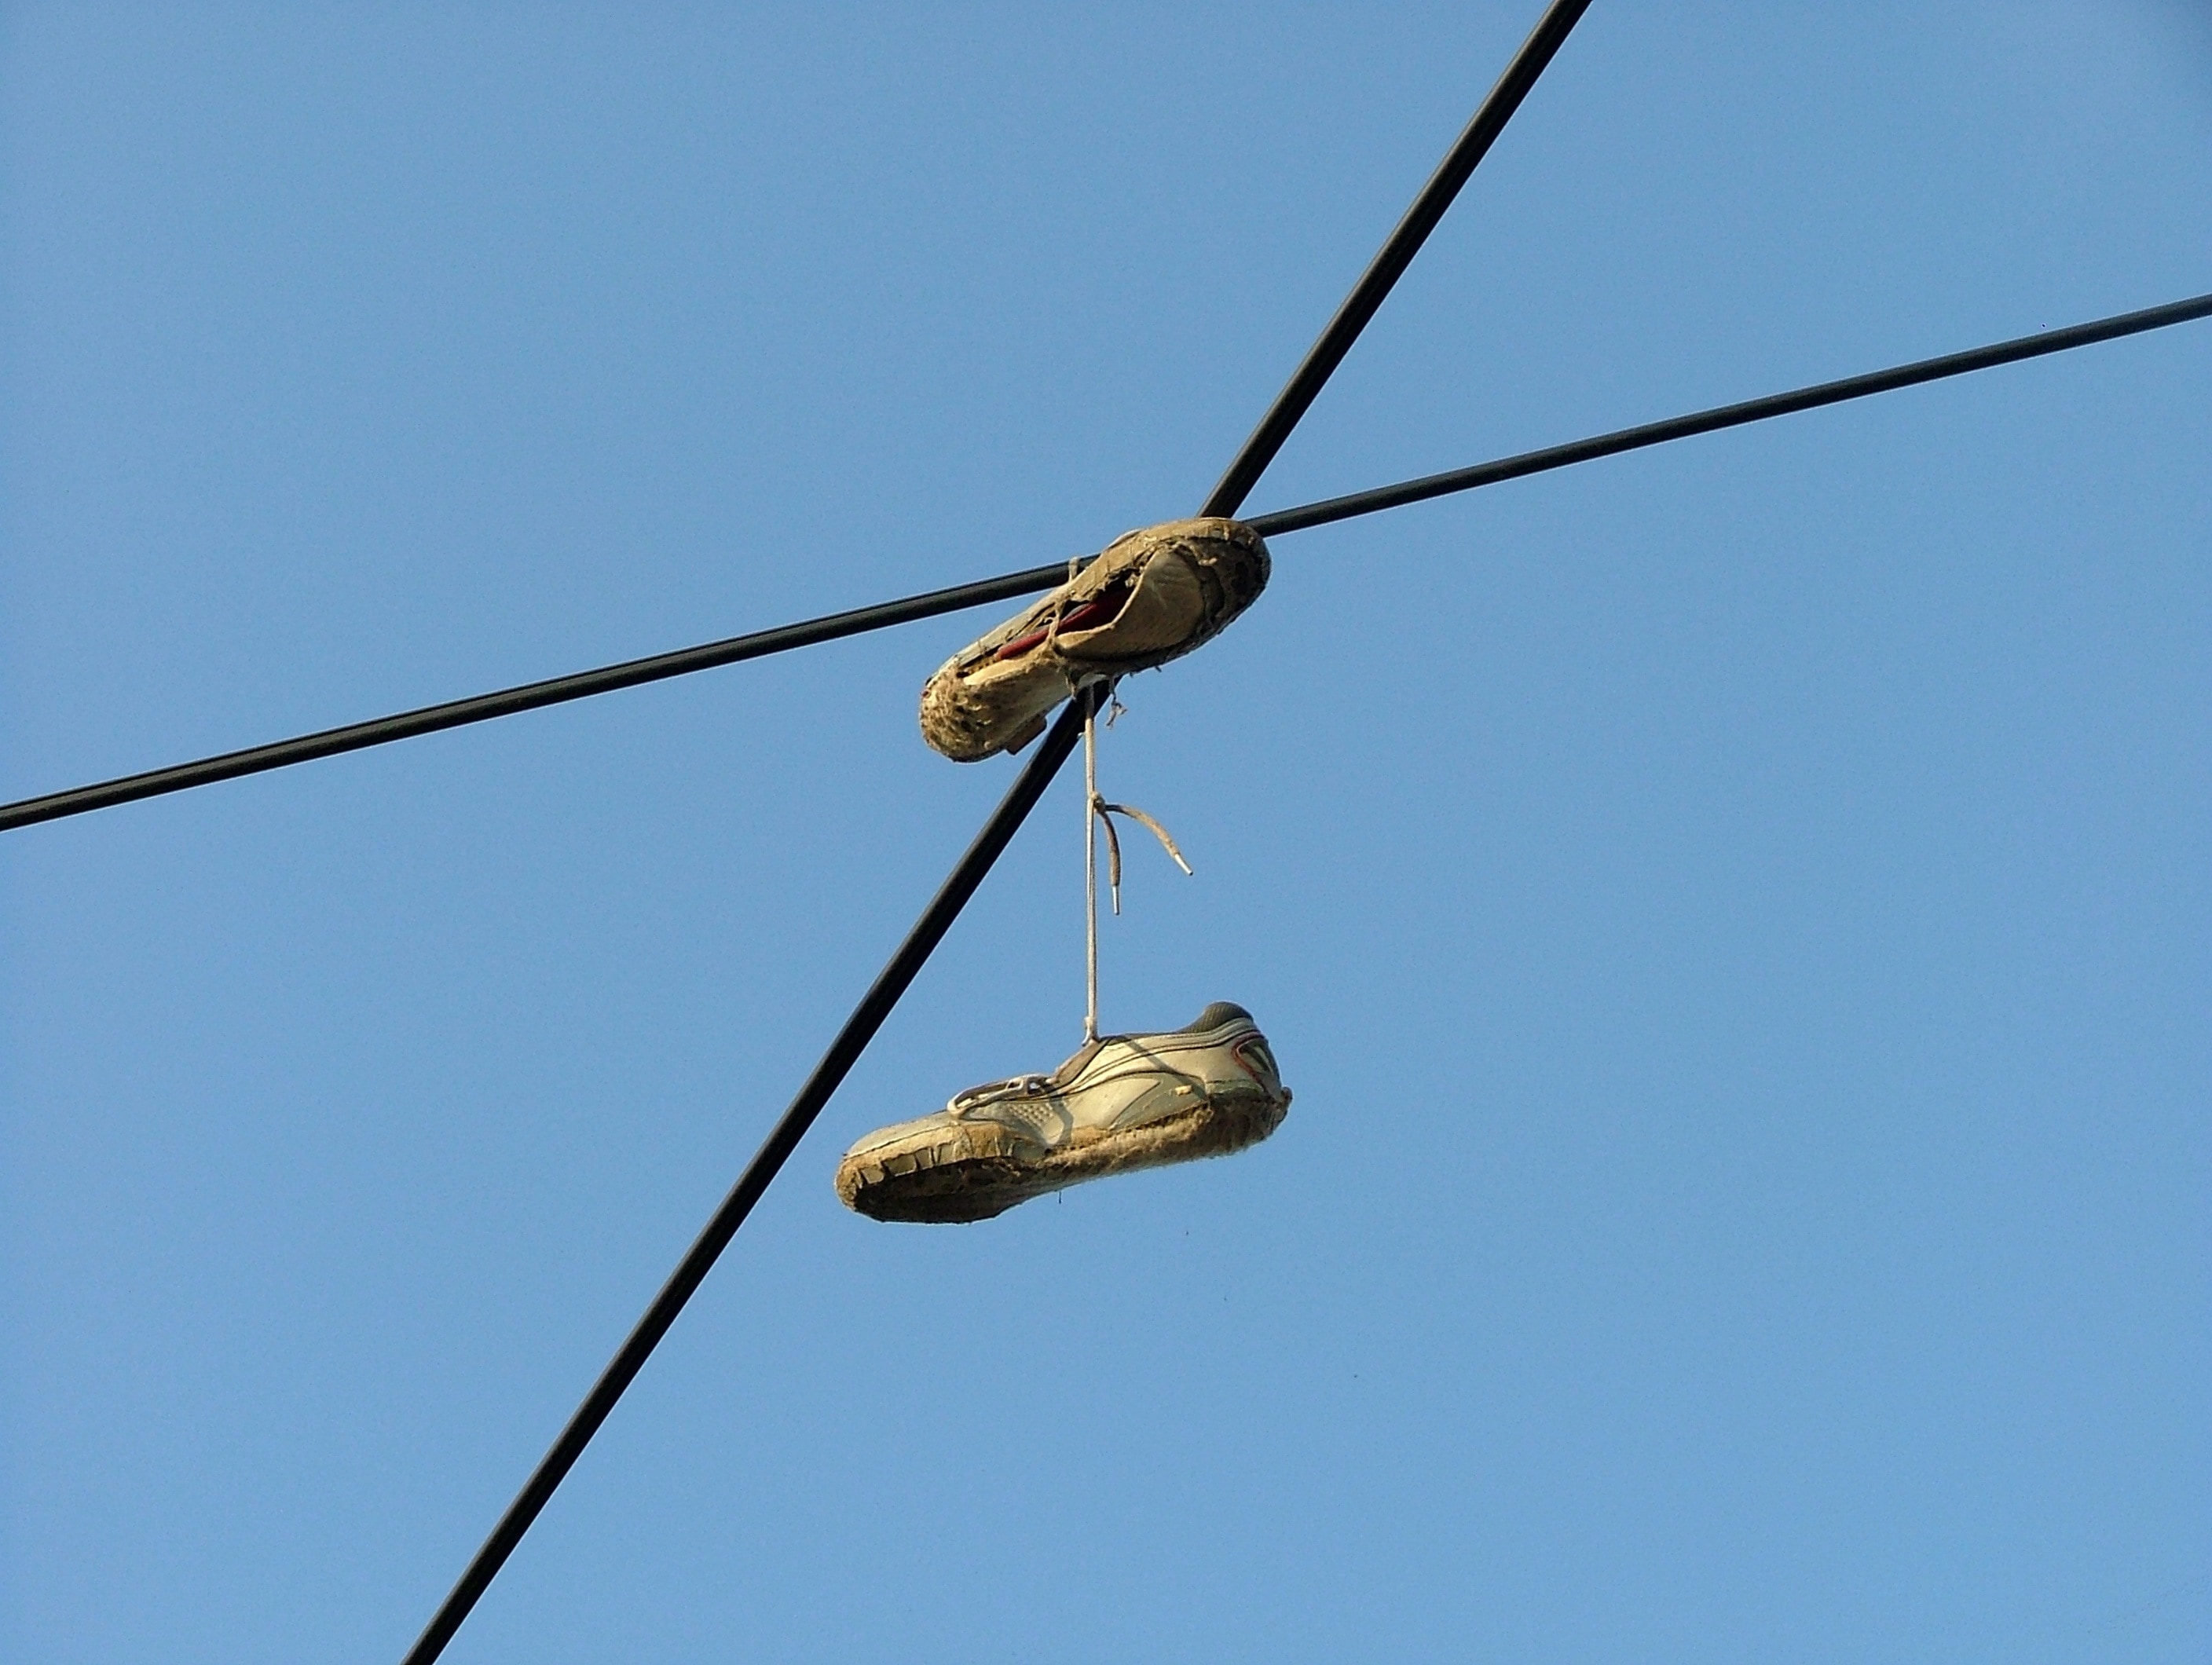 pair of white shoes on black metal rod under blue sky during daytime